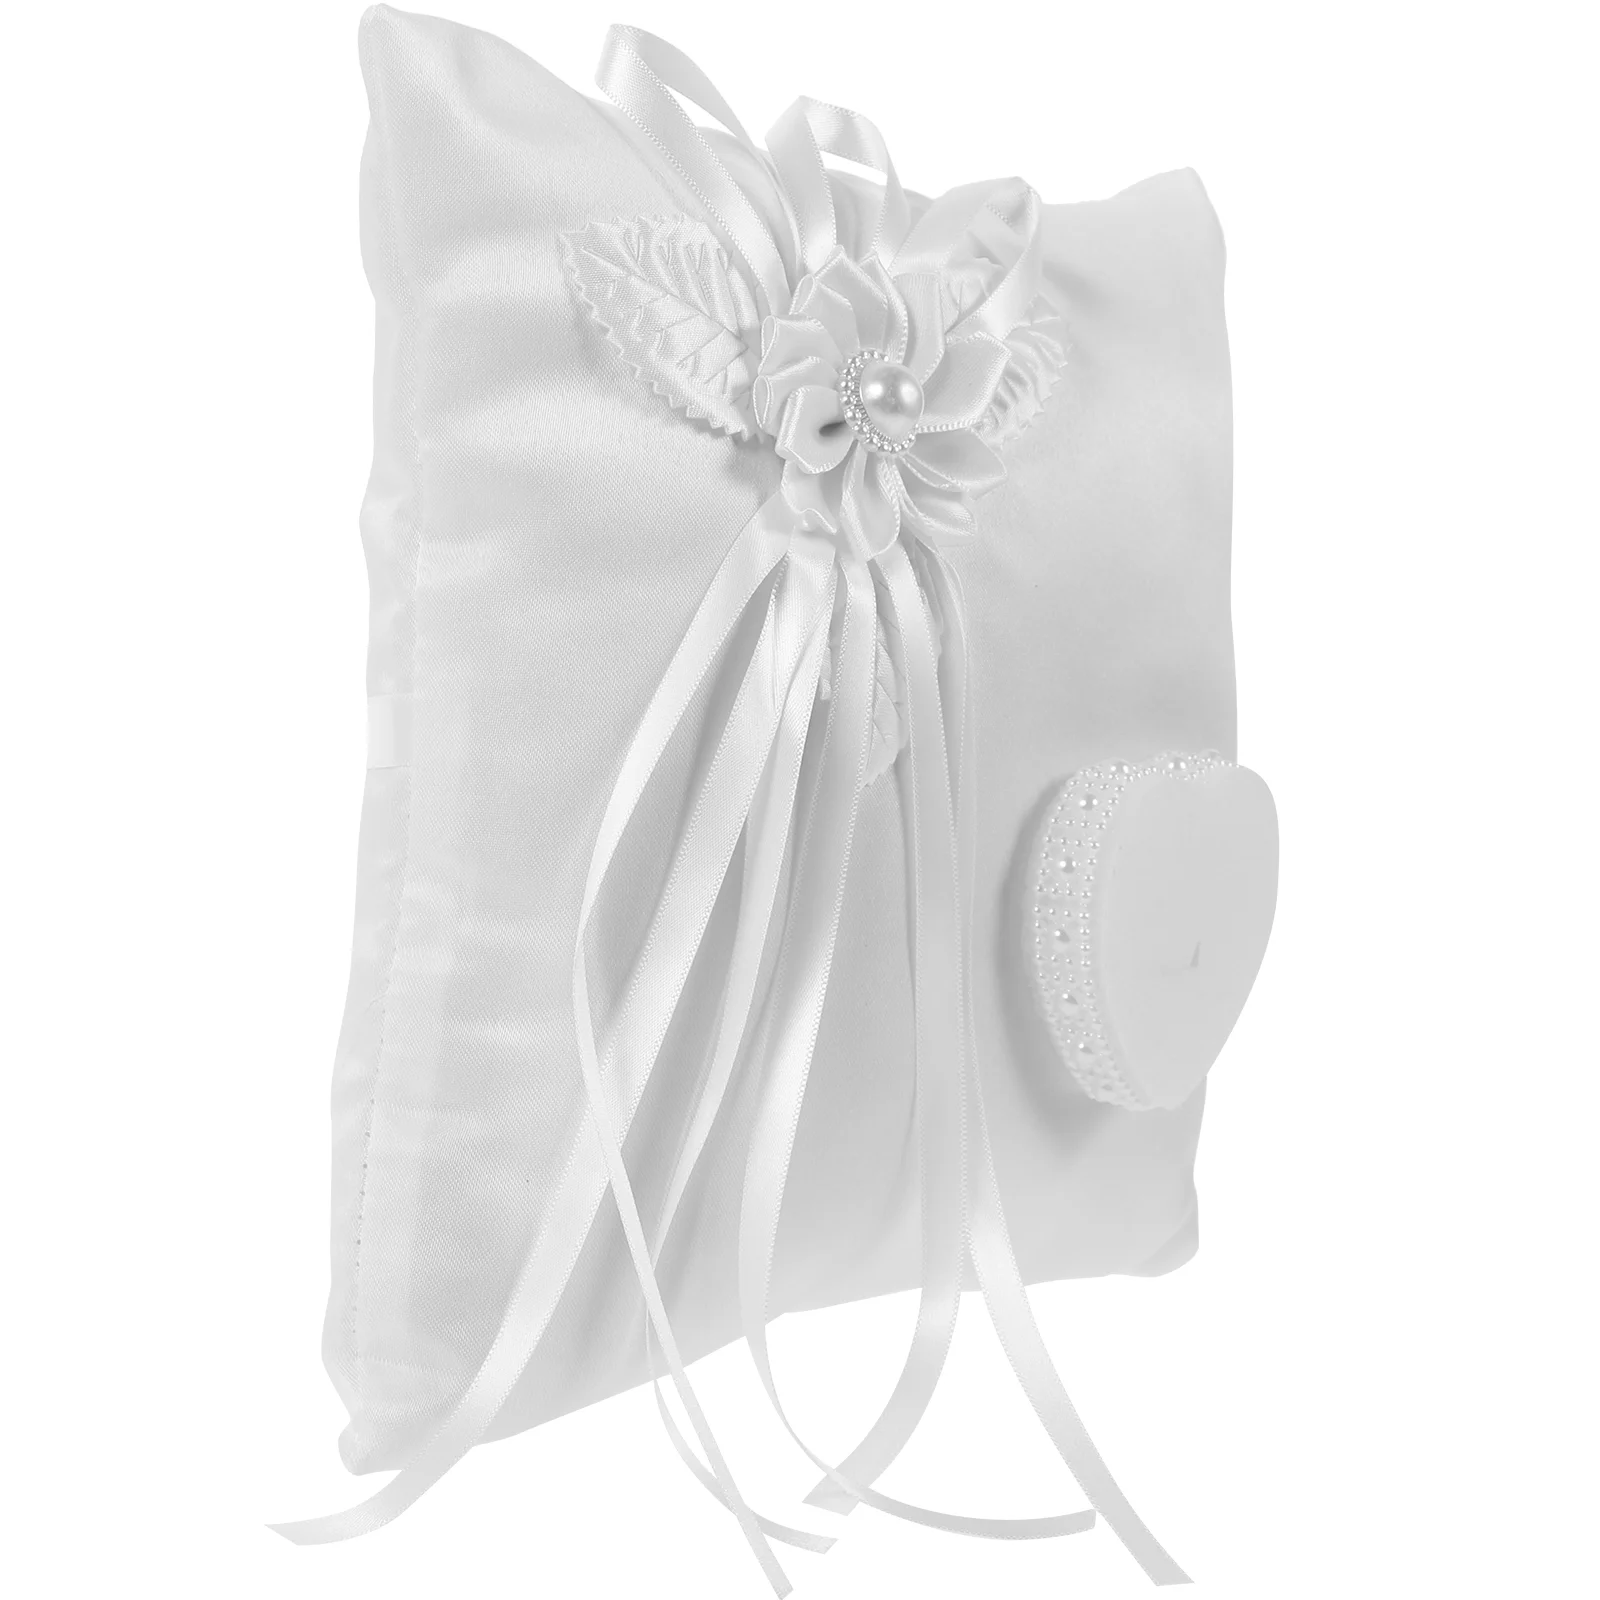 

Ring Pillow Wedding Cushion Flower Decorations Setting Fabric Bride Heart Pillows Marriage